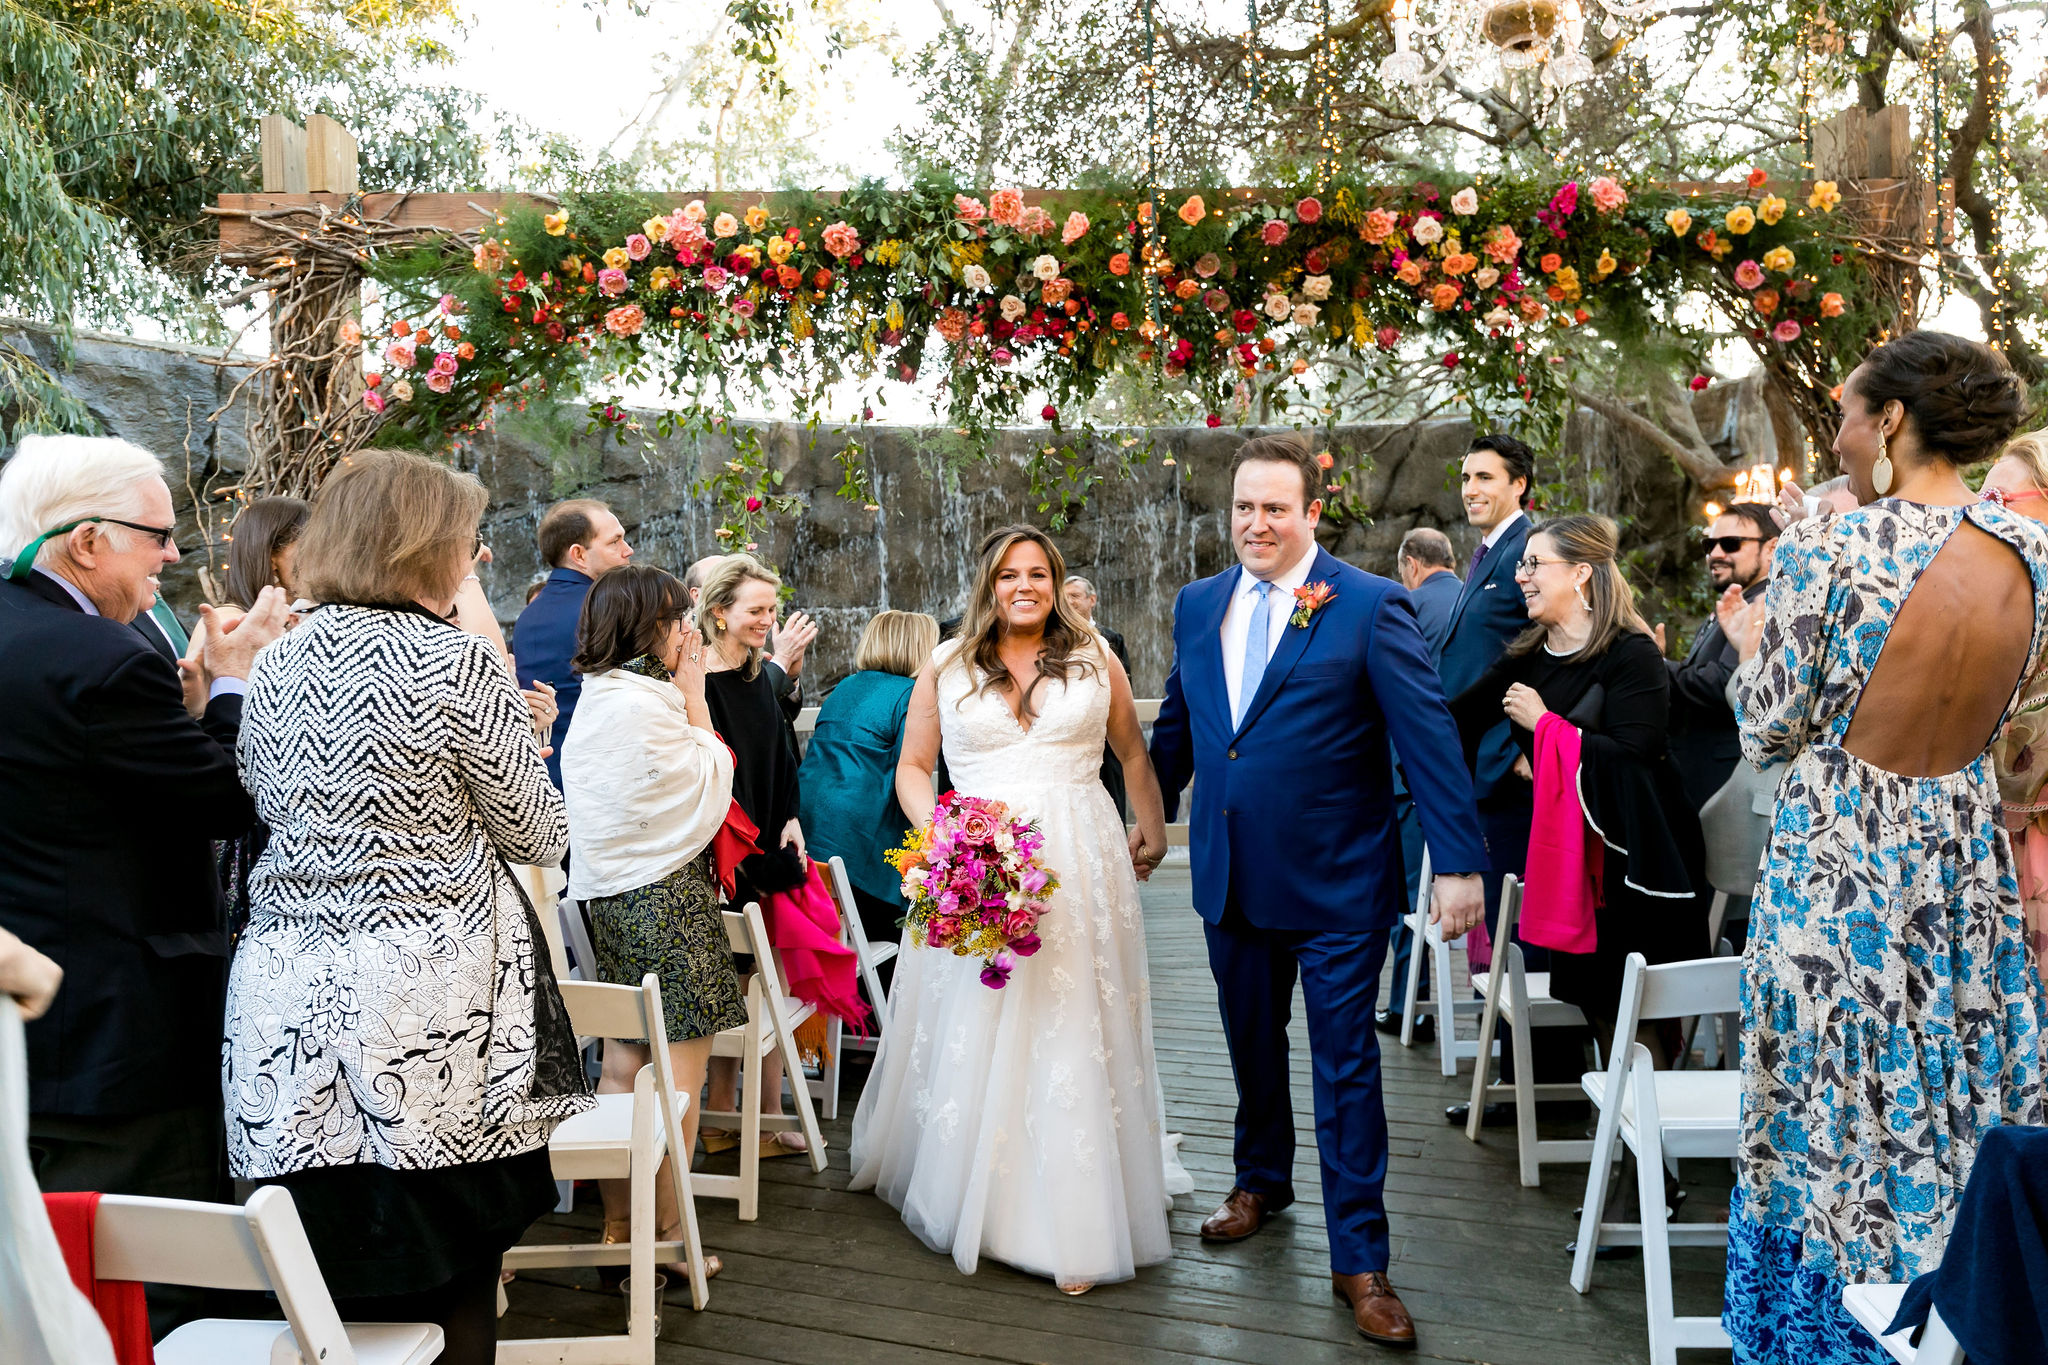 bride and groom recessional during bright and energetic wedding ceremony at Calamigos Ranch with red, pink, orange, yellow, purple and white florals hanging in front of waterfall 